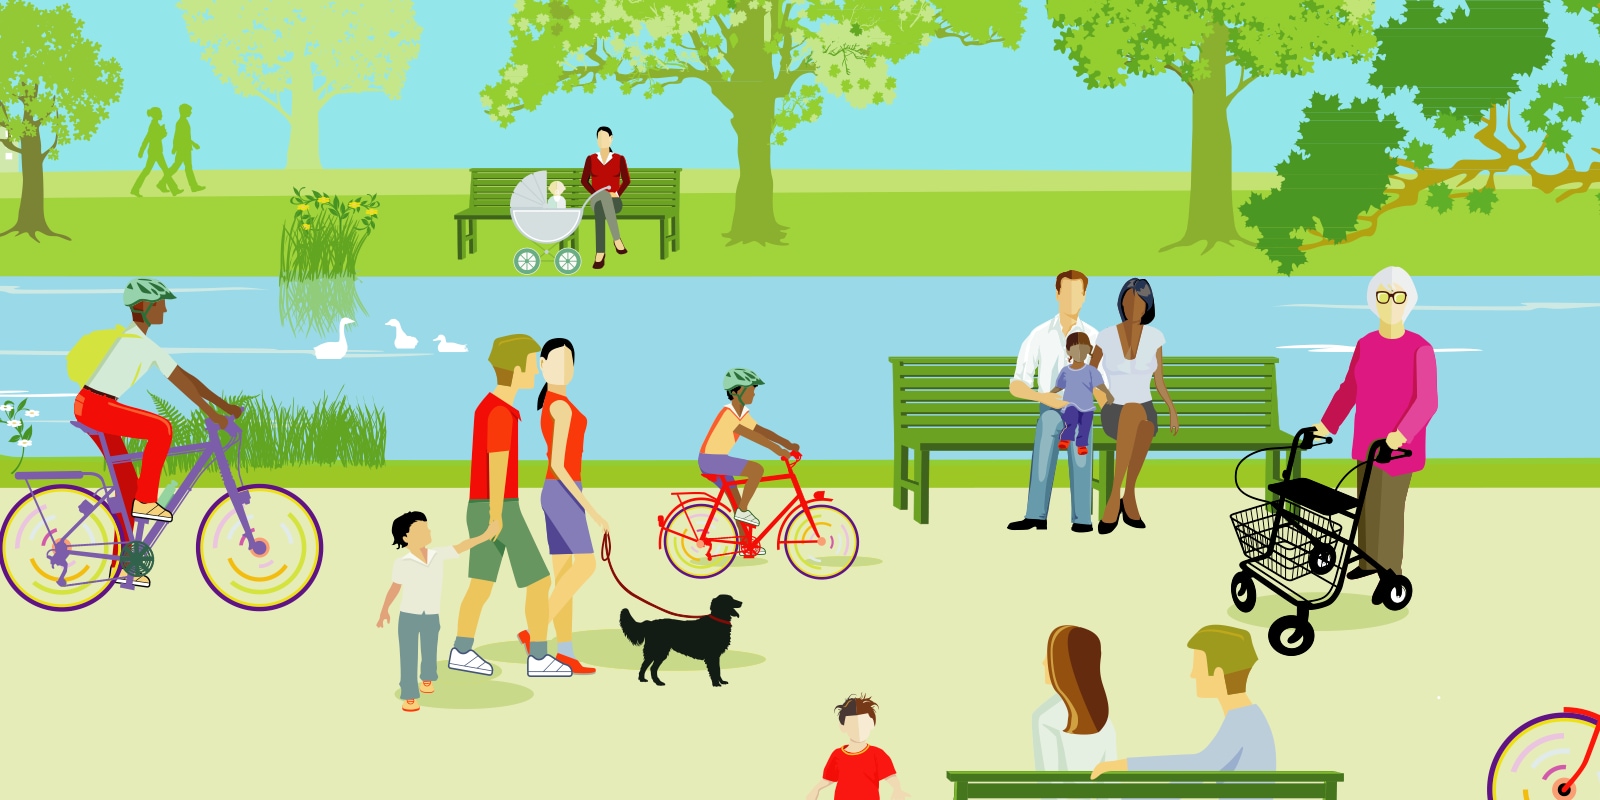 Illustration: Diverse people walking, biking, and hanging out in a park.